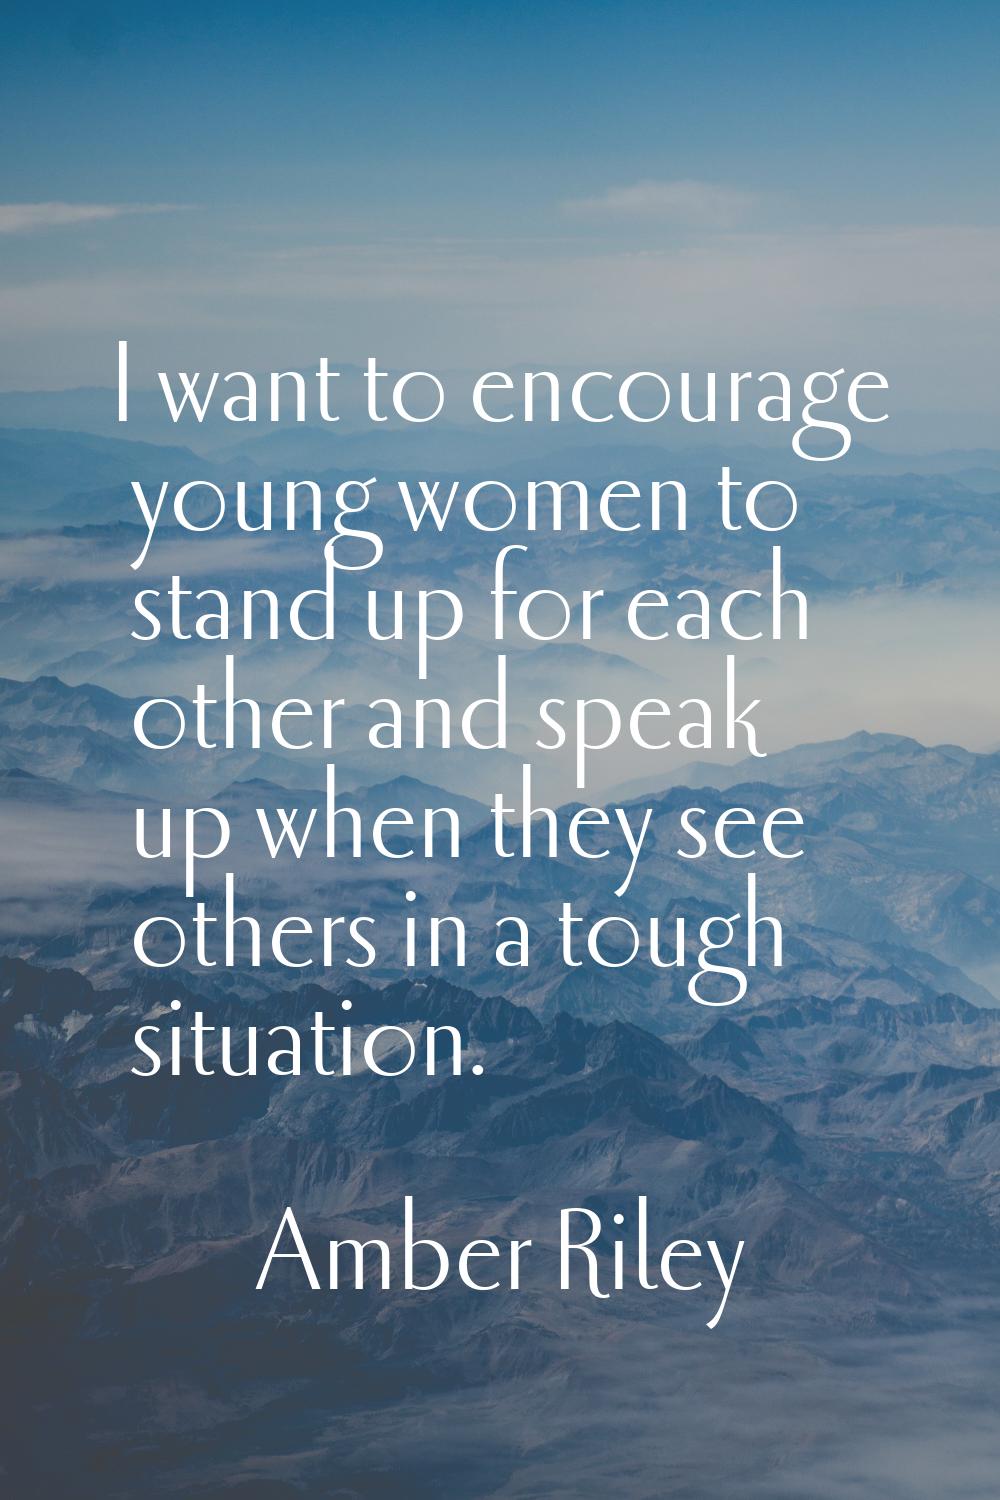 I want to encourage young women to stand up for each other and speak up when they see others in a t